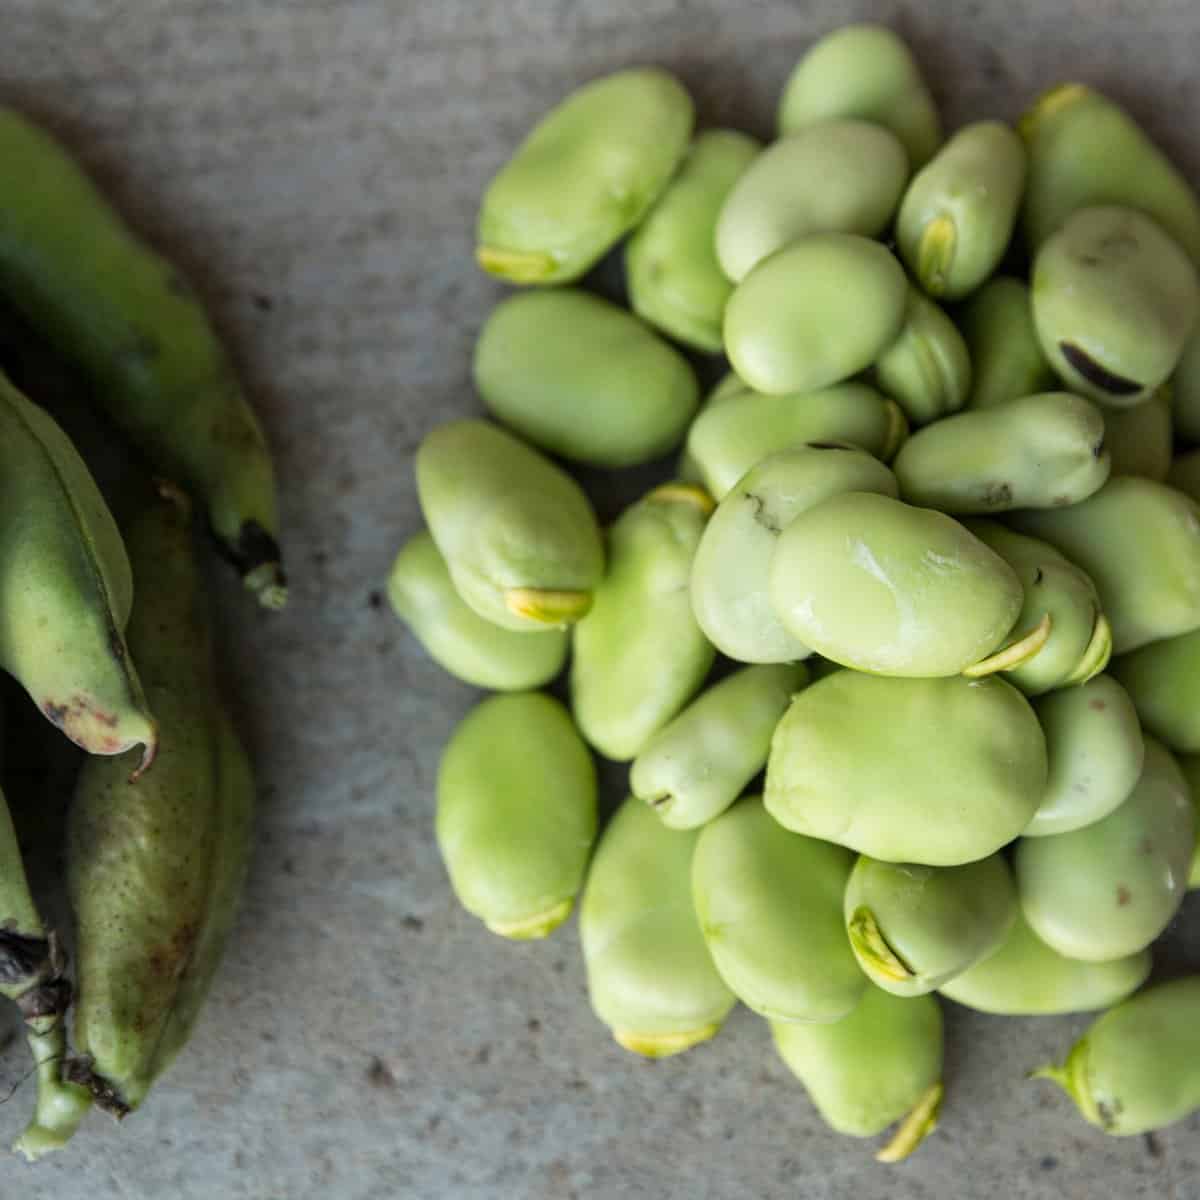 How to cook with lima beans